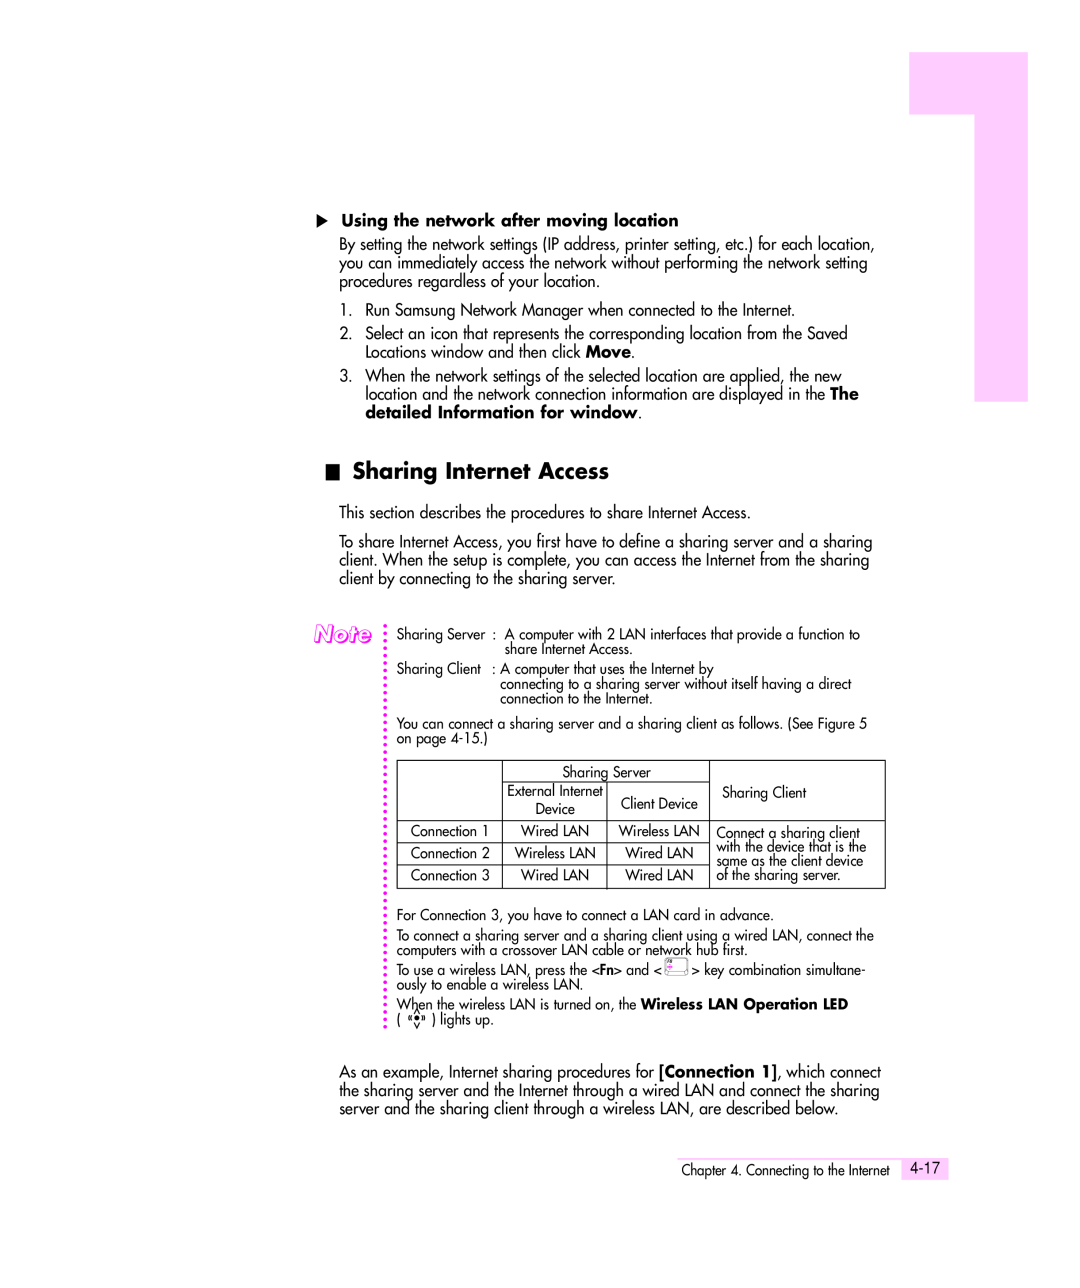 Samsung Q35 manual Sharing Internet Access, Using the network after moving location 